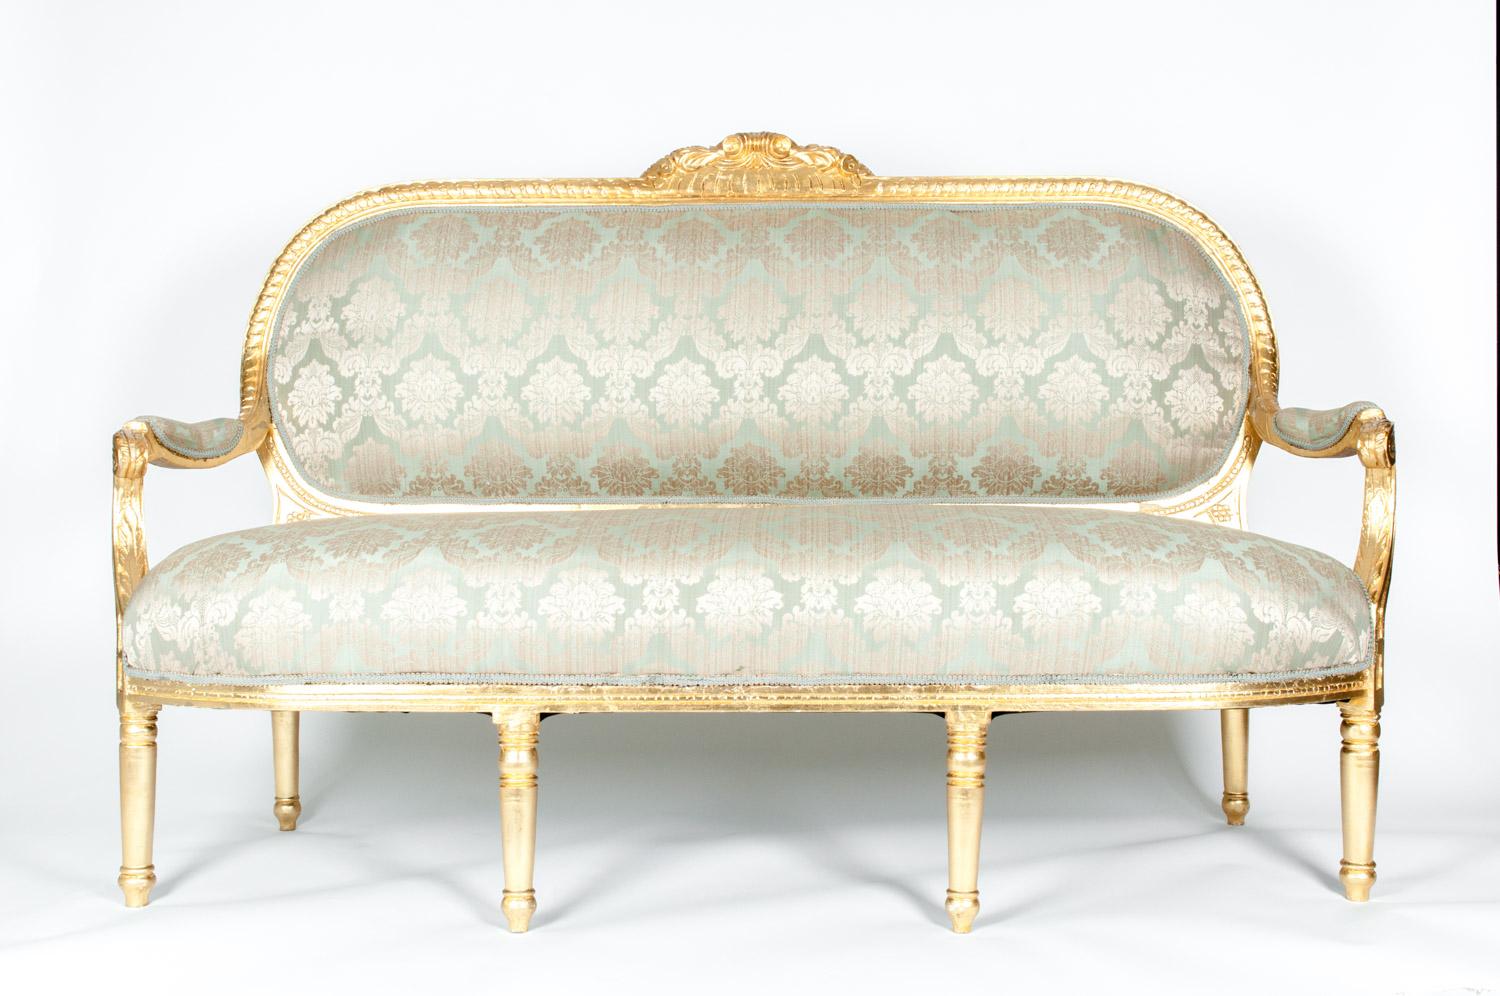 Gilded wood framed Victorian style French settee / sofa . The settee is in good vintage condition & very sturdy with minor gilt wear appropriate with age / use . The upholstery is very immaculate . The settee measure about 67 inches width X 43